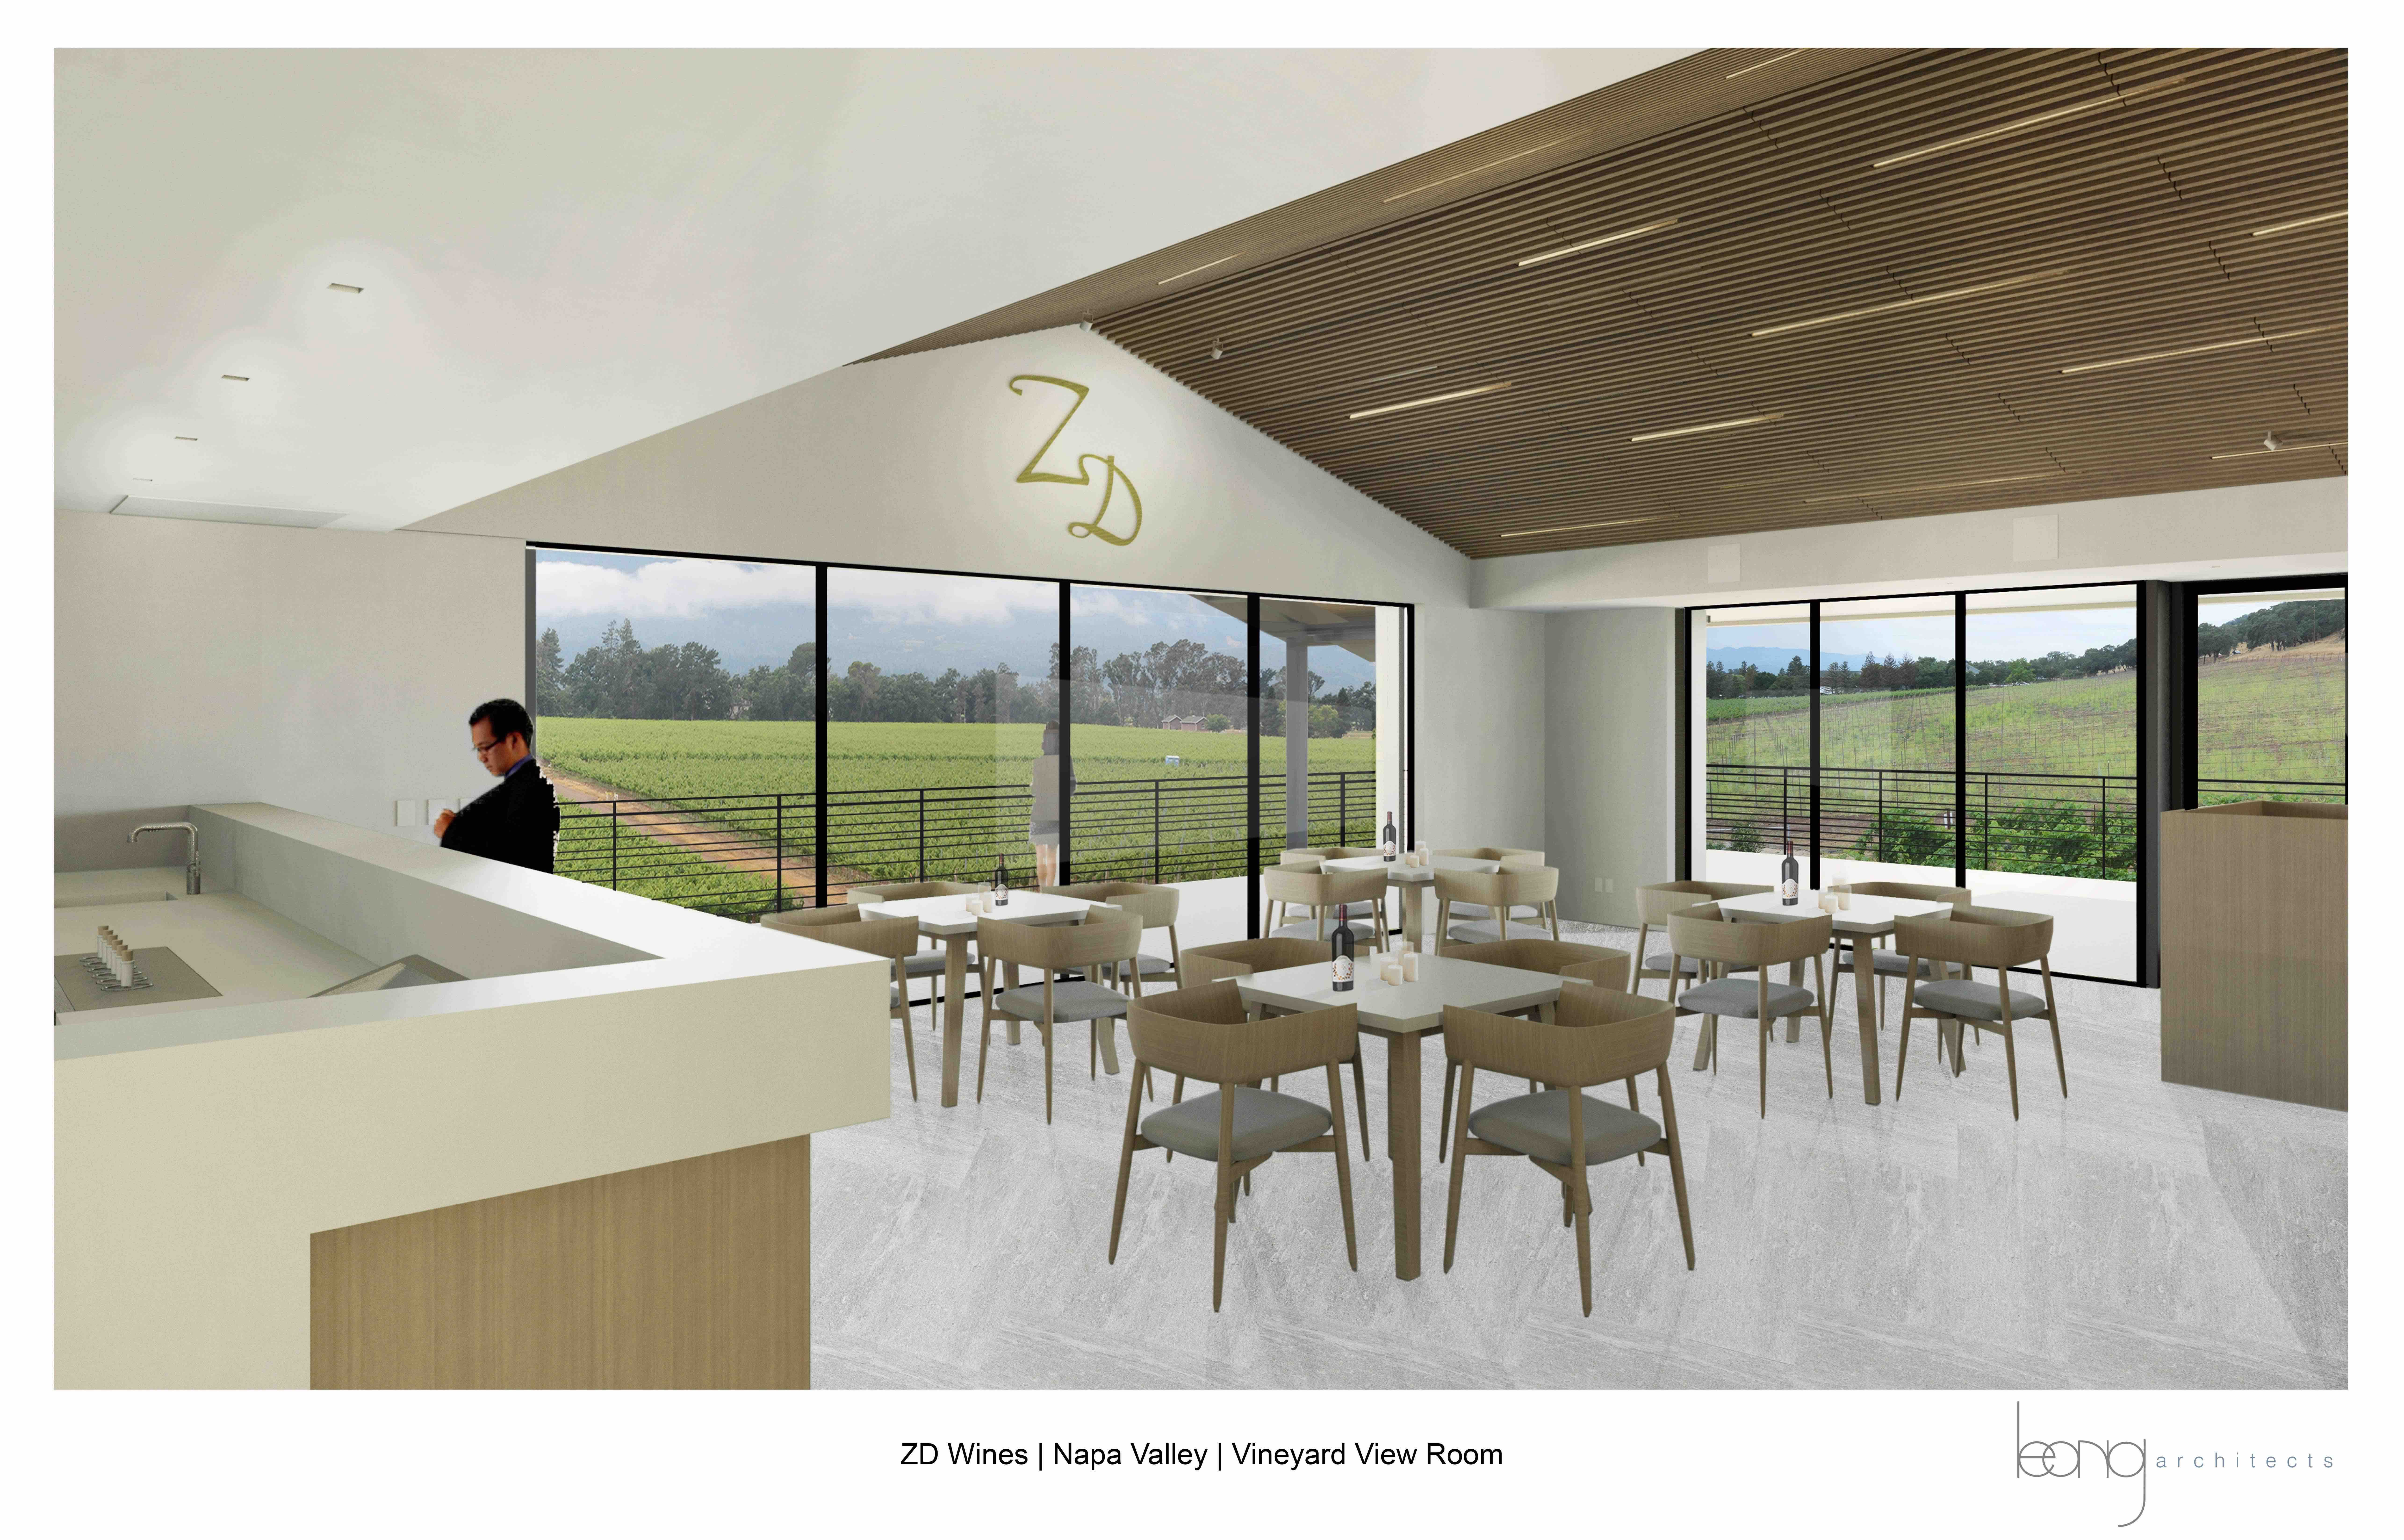 Wayne Leong of Leong Architects, in partnership with the deLeuze family, designed the new ZD Wines hospitality center that features a sleek, modern design that offers unobstructed views of the valley